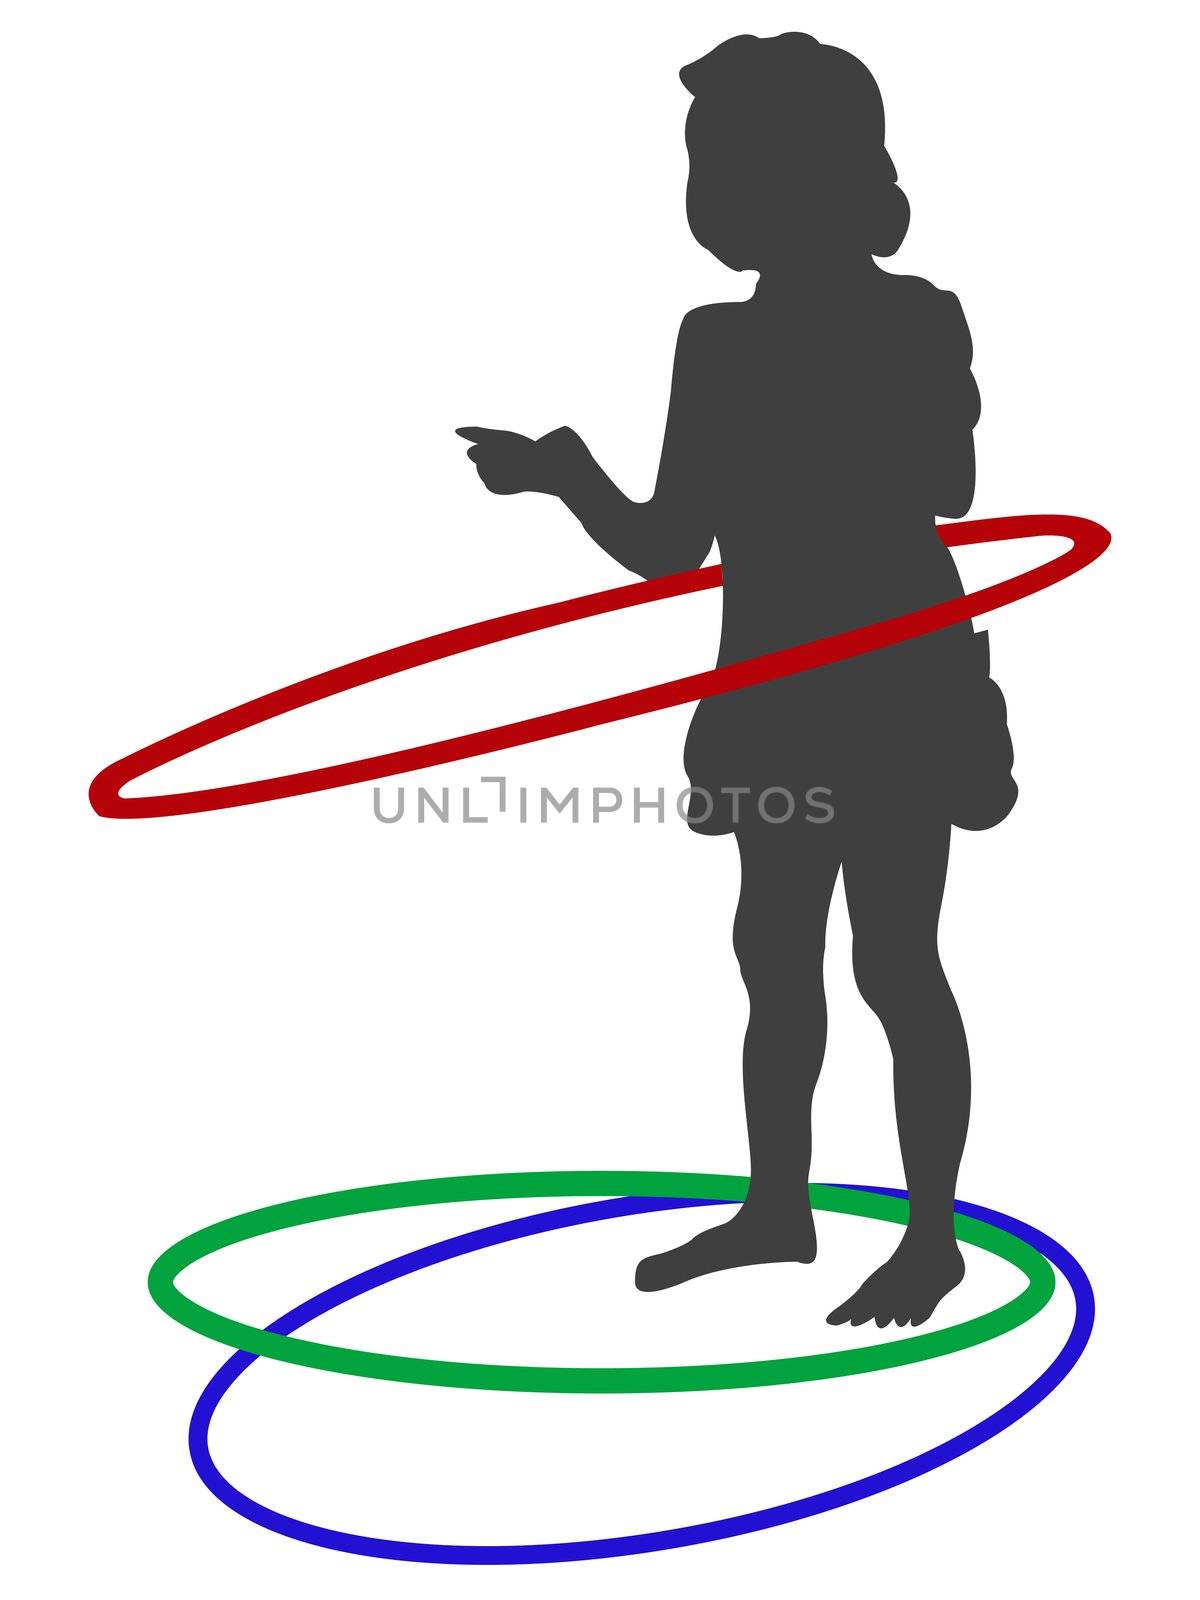 silhouette of girl playing with circles against white background, abstract vector art illustration